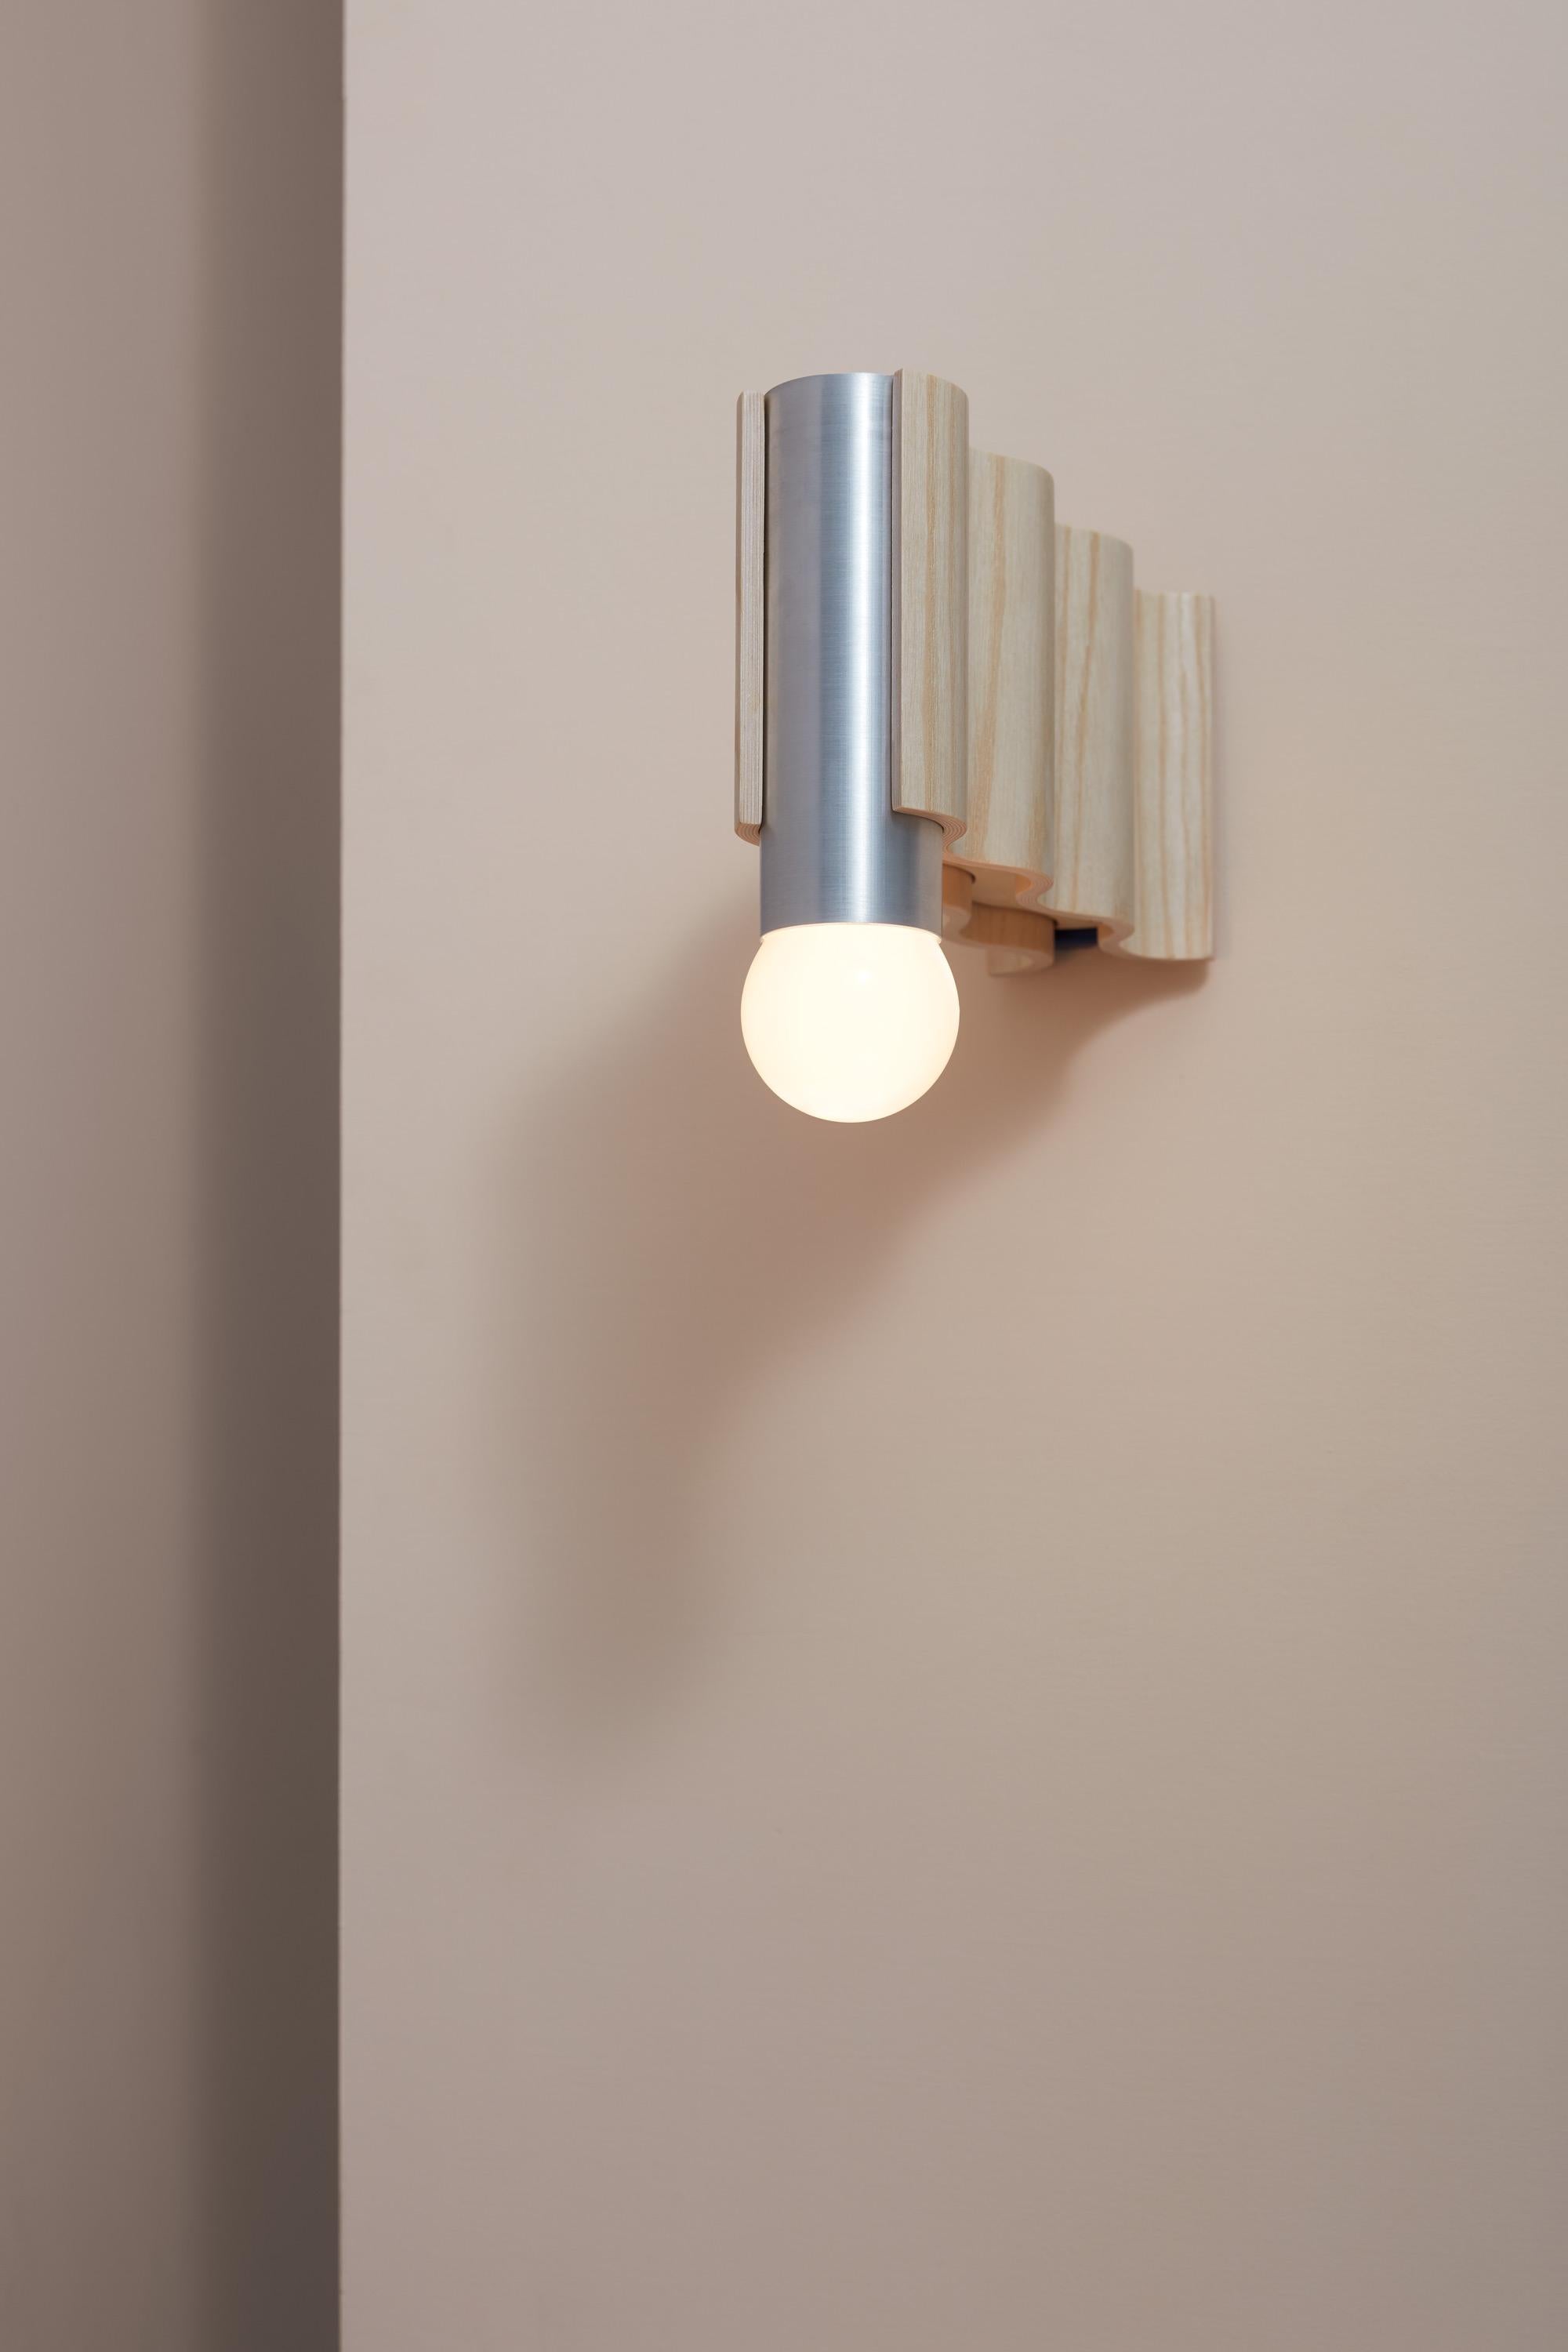 Single sconce made from natural ash veneered plywood (clear coated) and sapphire blue powder-coated aluminium tube.

Technical information:
- Comes with dimmable bulb (Class A60, 8W, 720 Lumen, 3000° Kelvin, A+ energy rating, Ra > 80)
- Can be wired